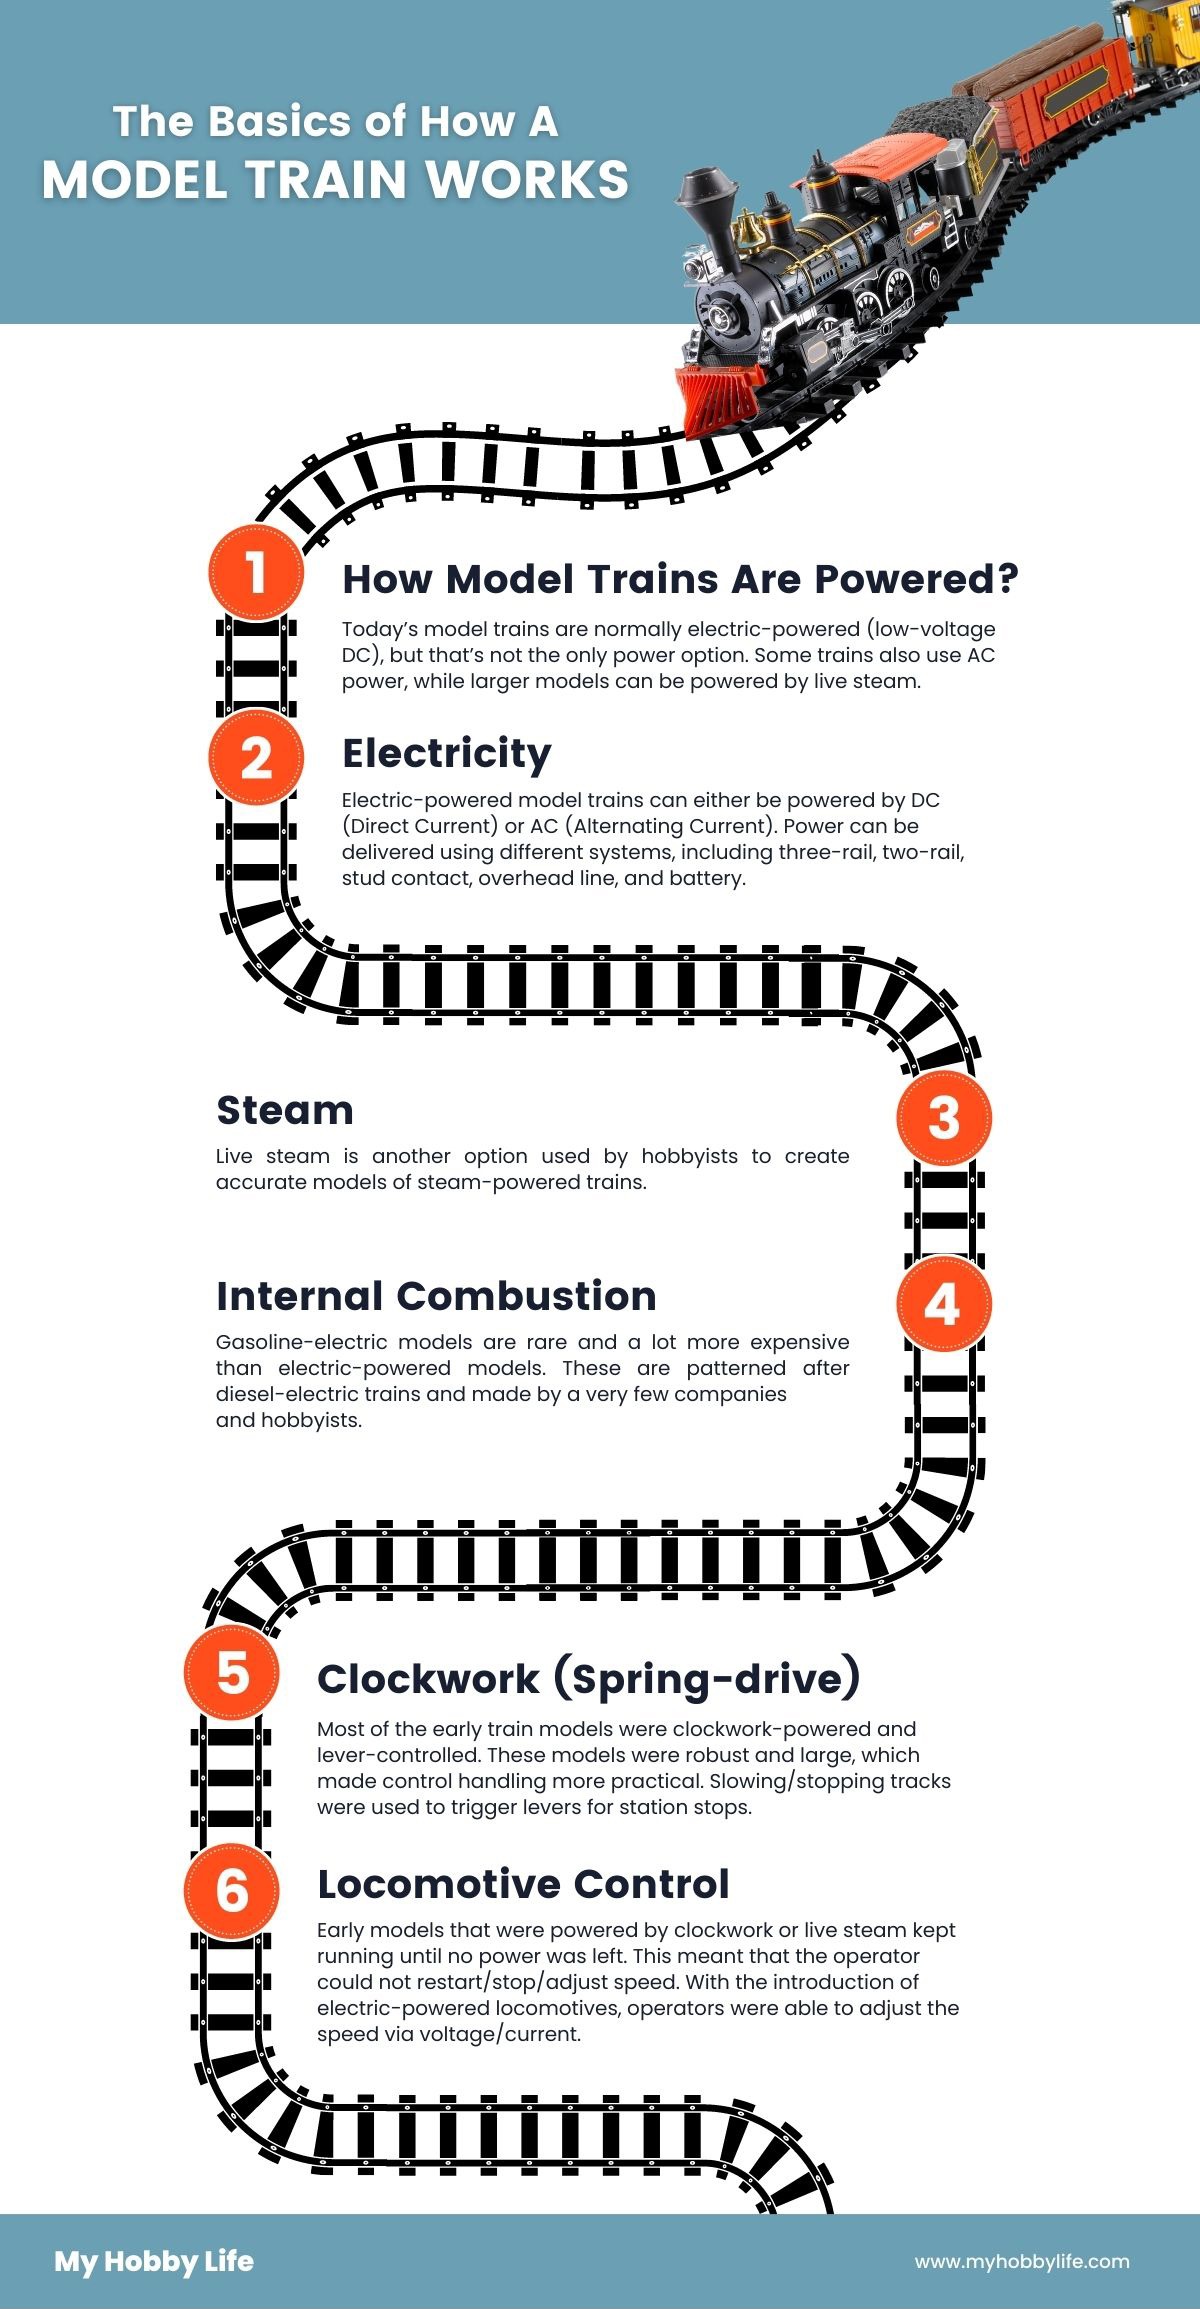 The Basics of How A Model Train Works